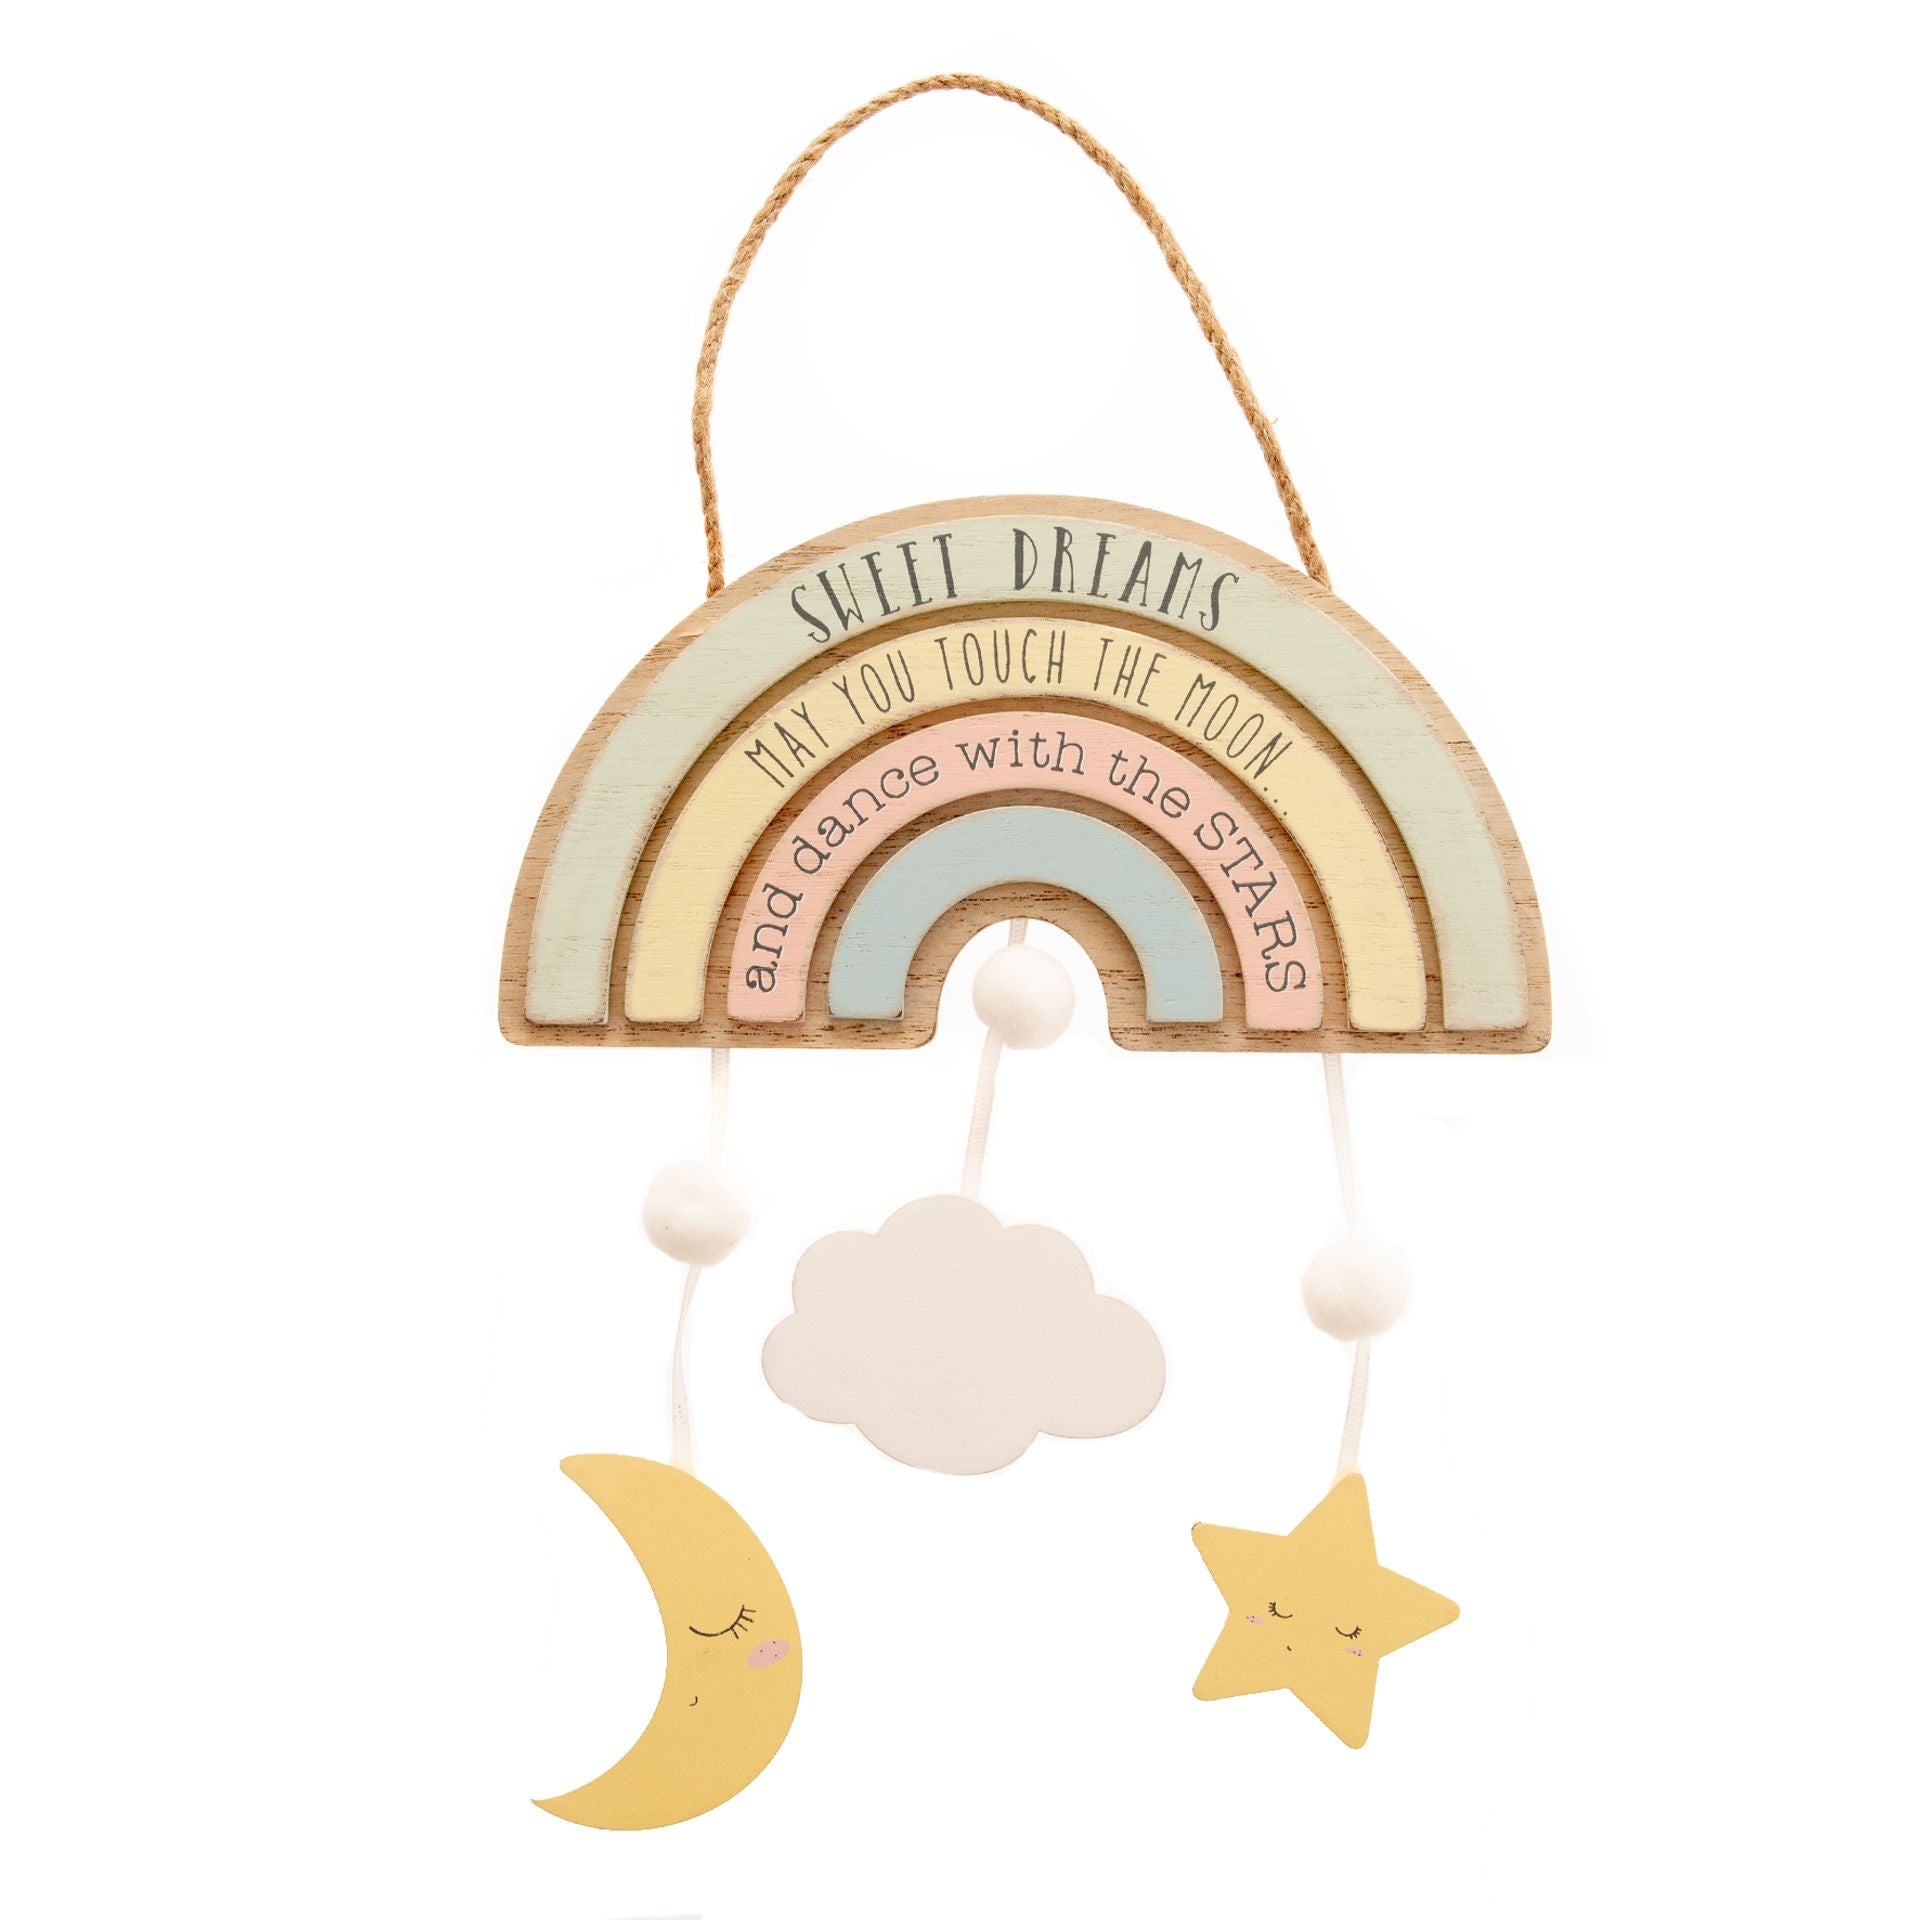 This beautiful hanging plaque features a soft pastel palette and sweet sentiments